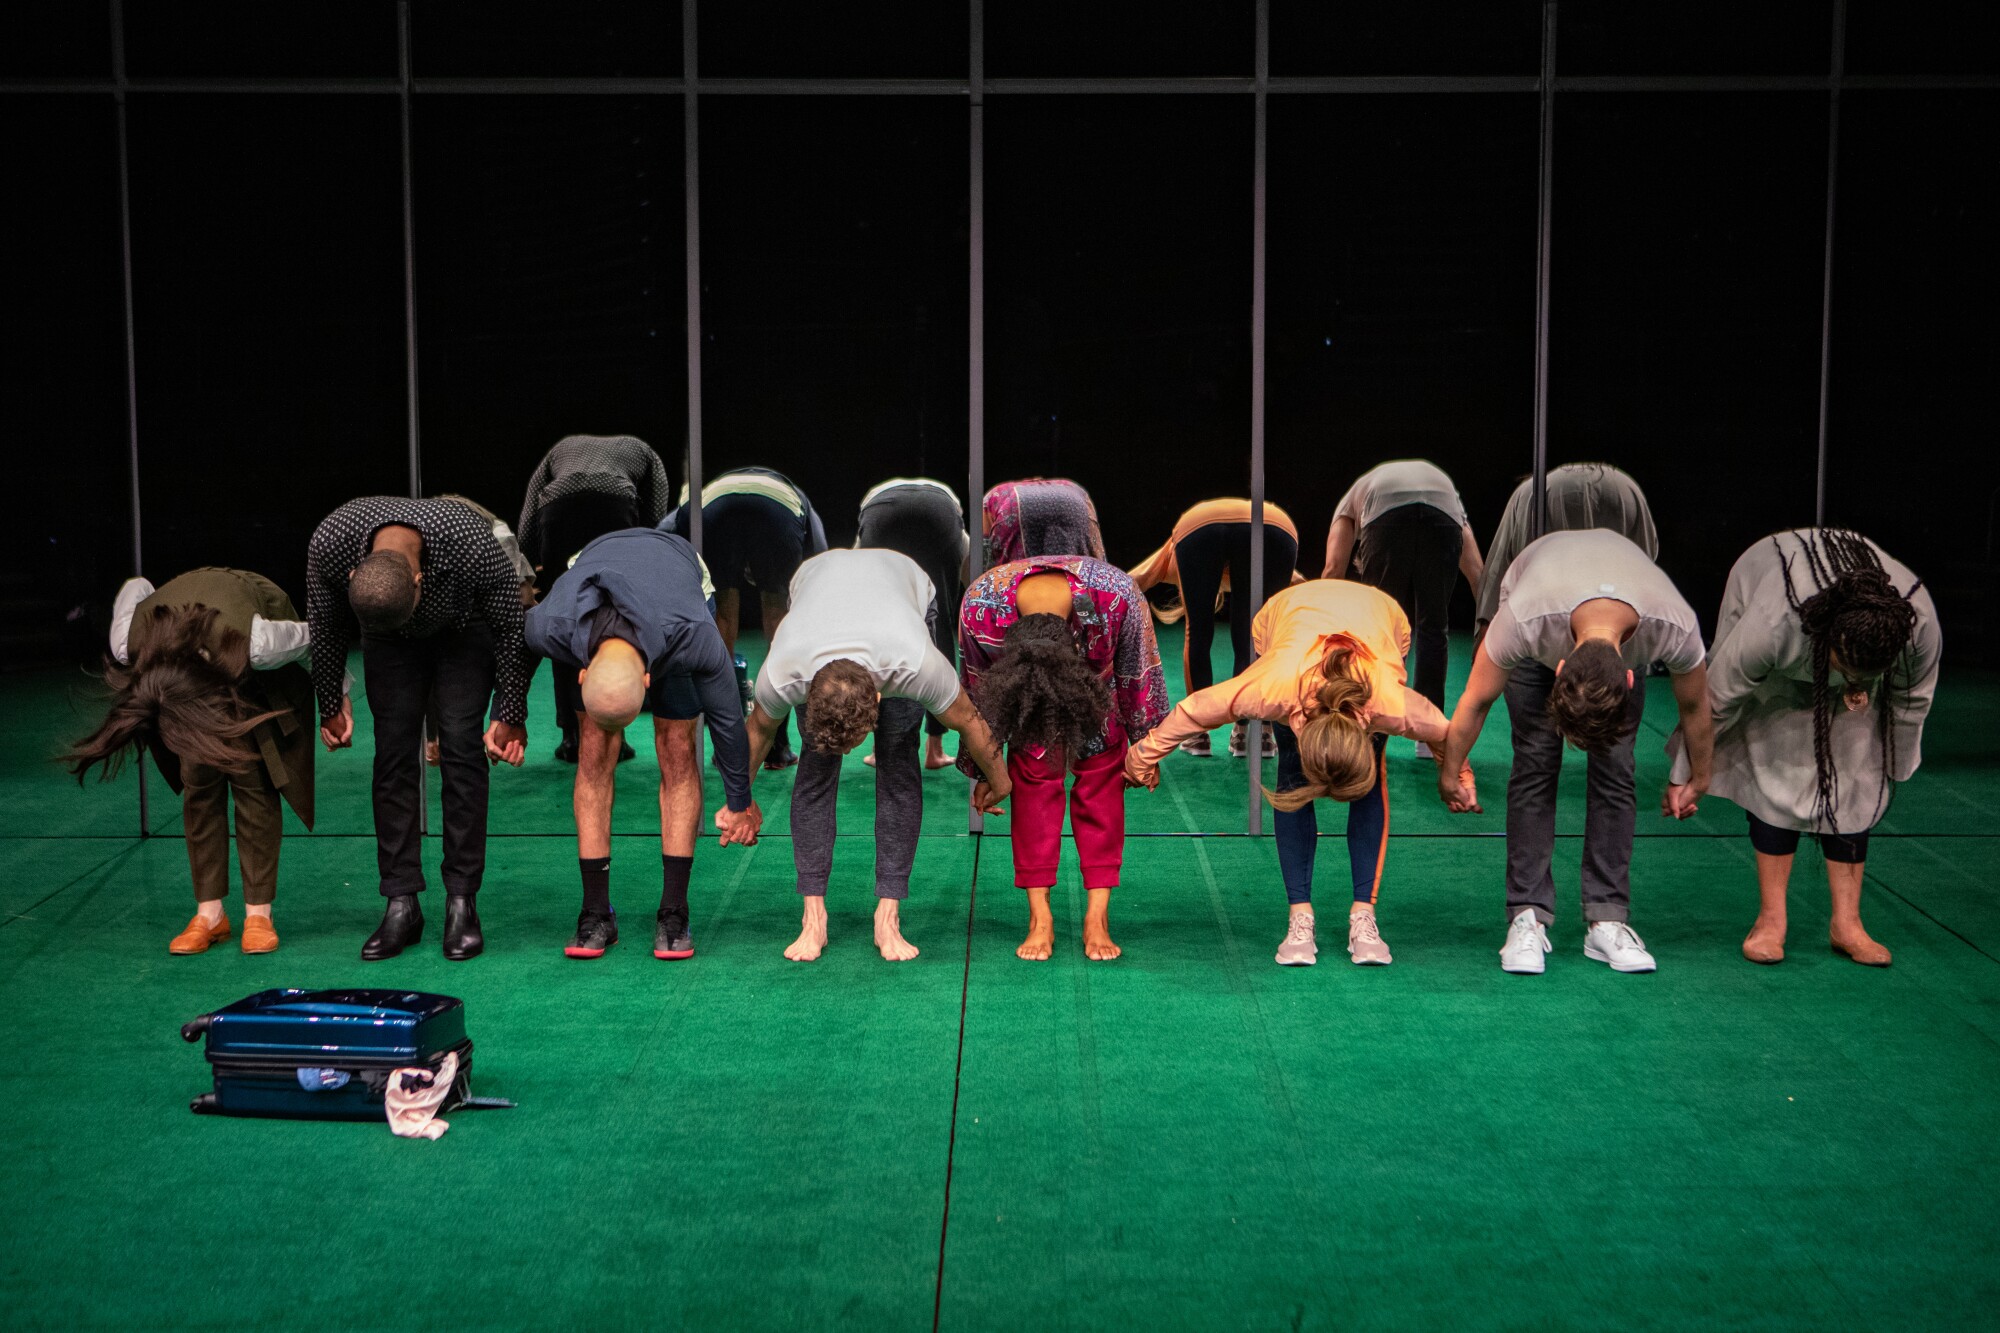 In front of a mirrored backdrop, the cast of "Slave Play" links hands and bows.